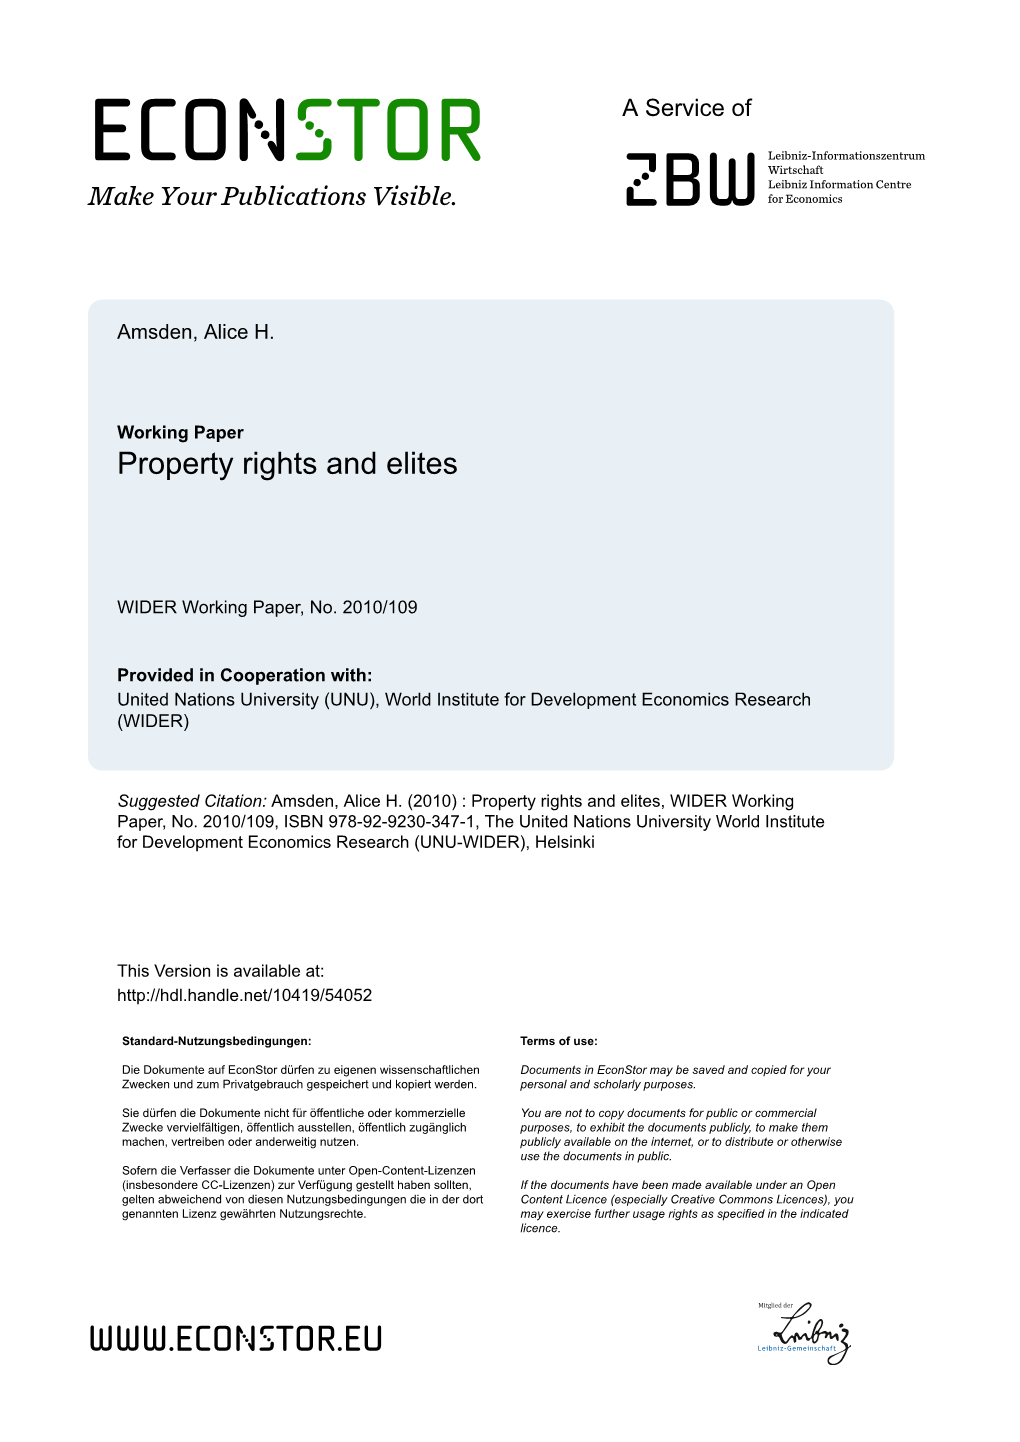 WIDER Working Paper No. 2010/109 Property Rights and Elites